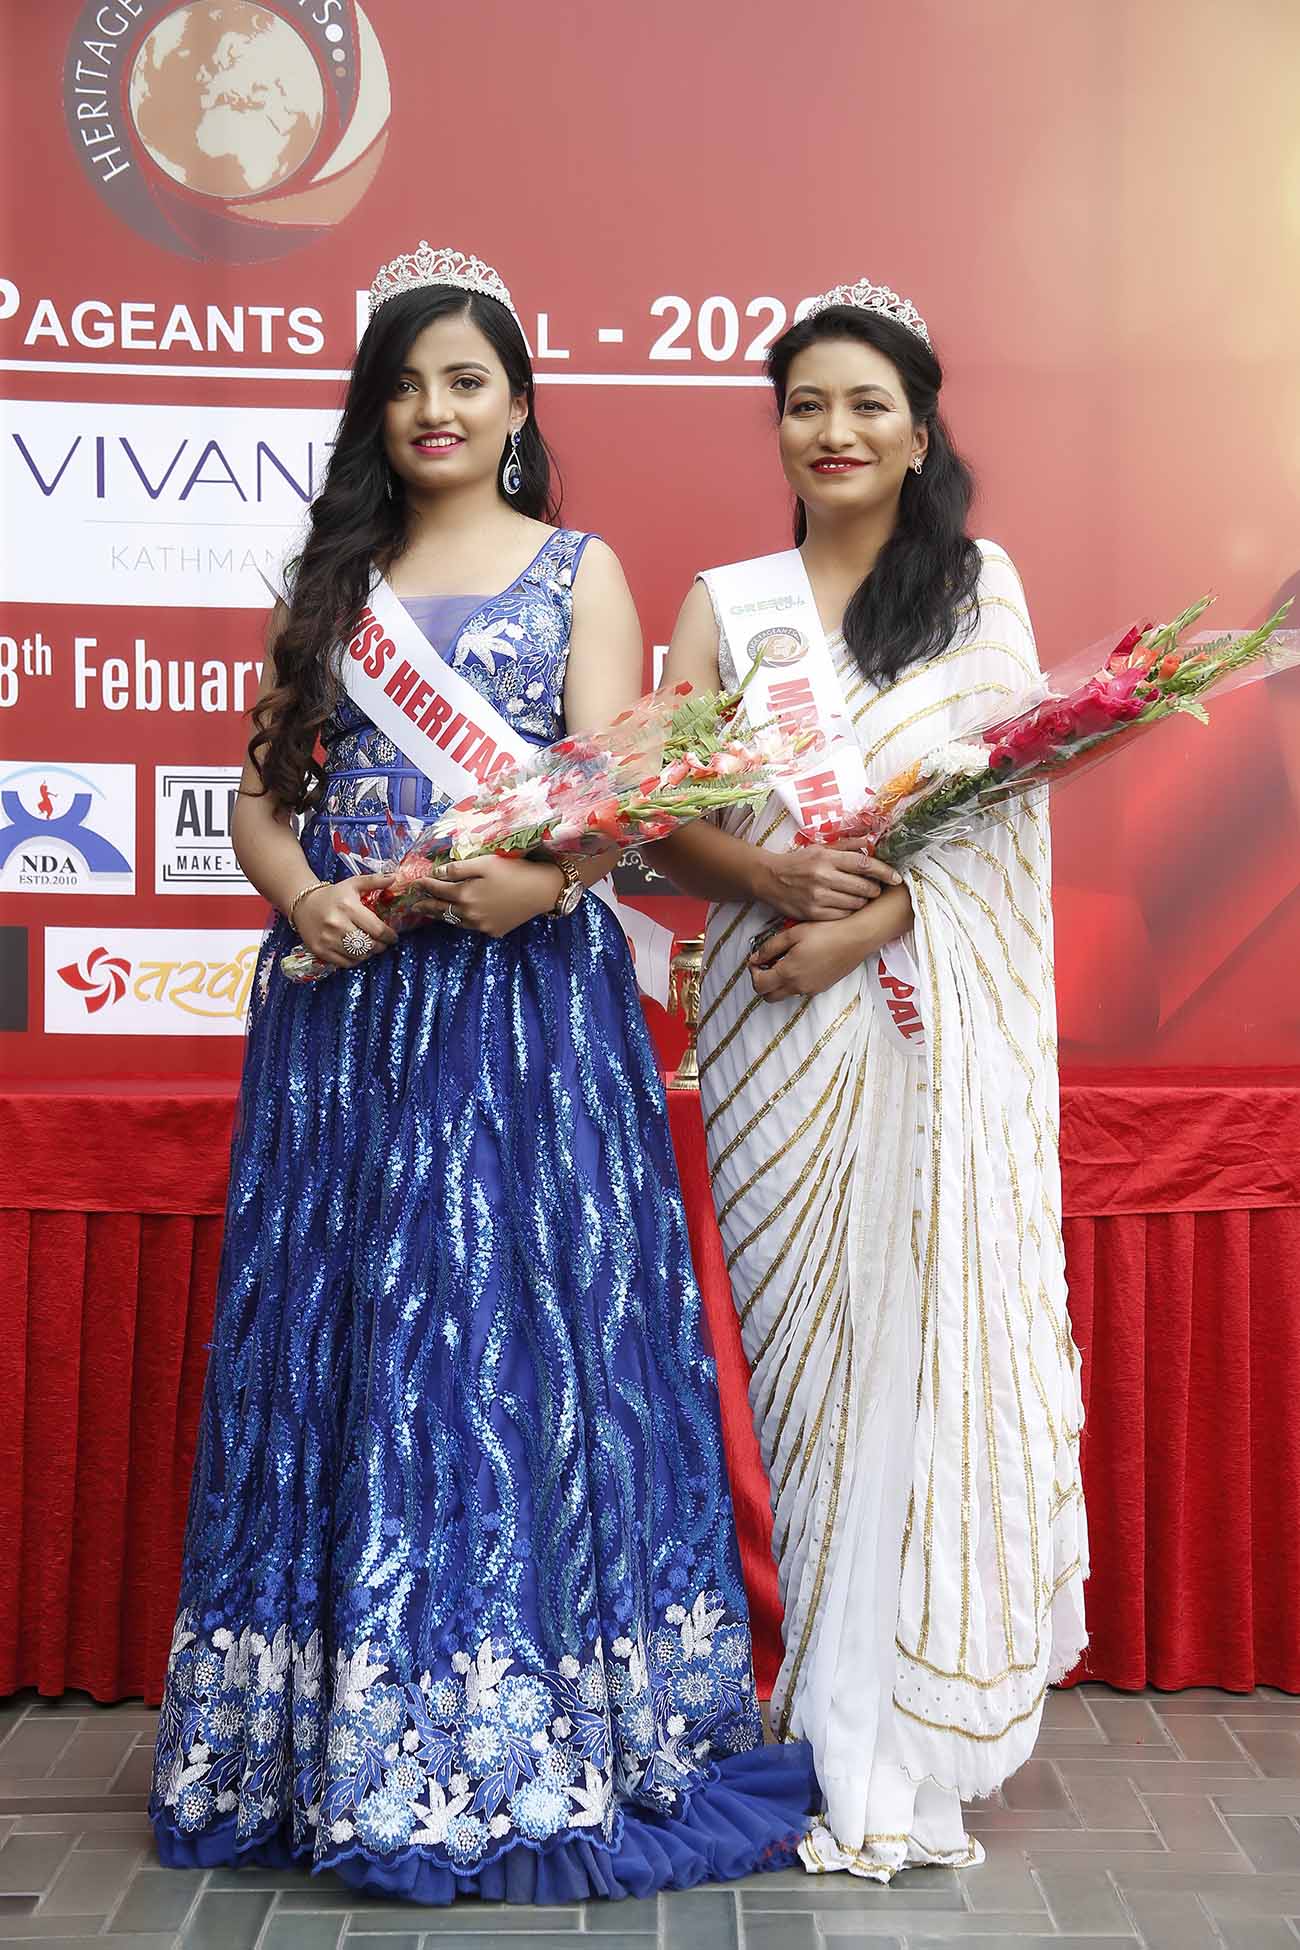 Pranisha and Pranindha all set to represent Nepal in ‘Heritage Pageants 2020’